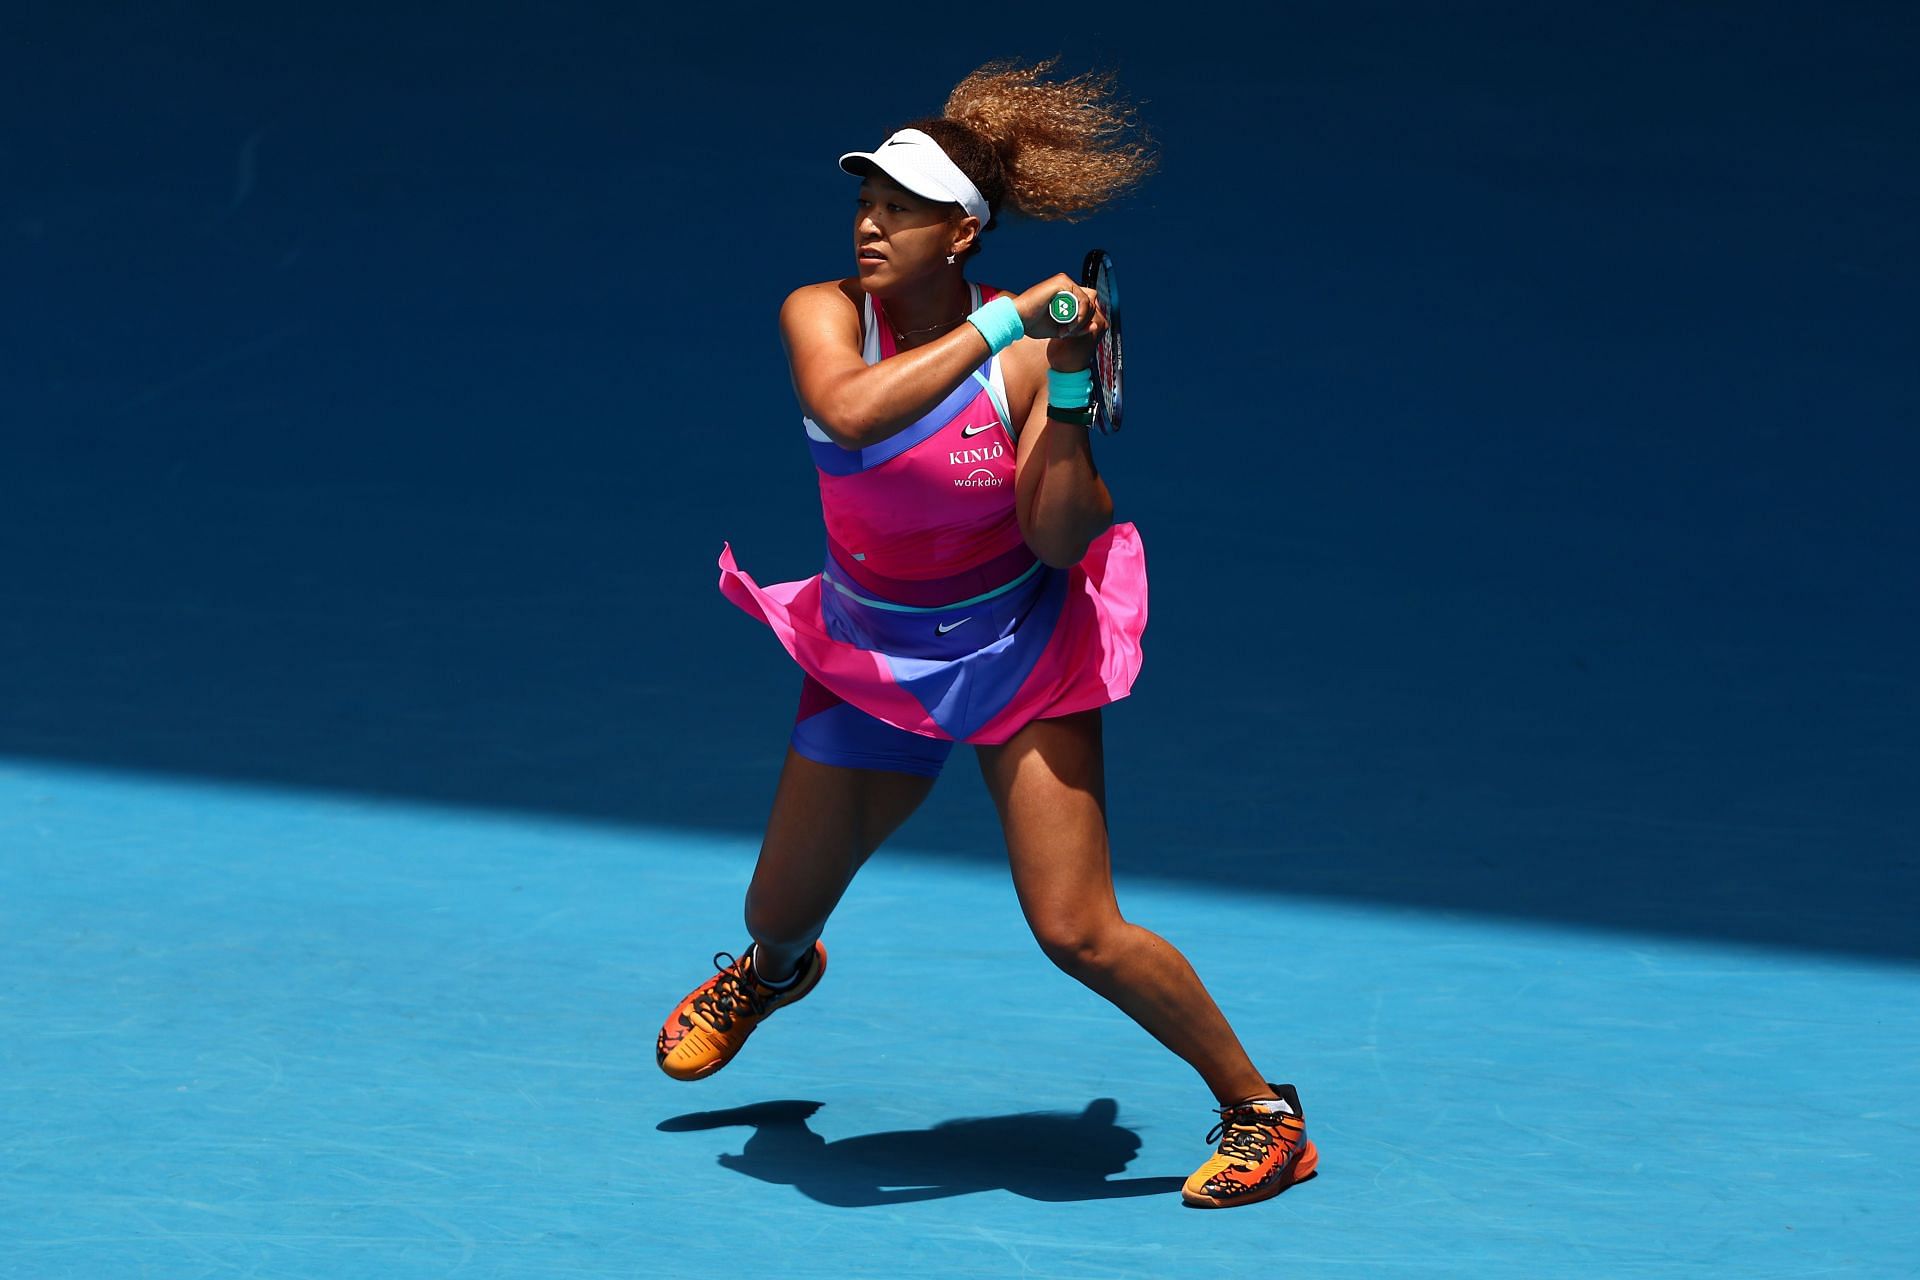 Naomi Osaka won her first career title at the 2018 Indian Wells Open.